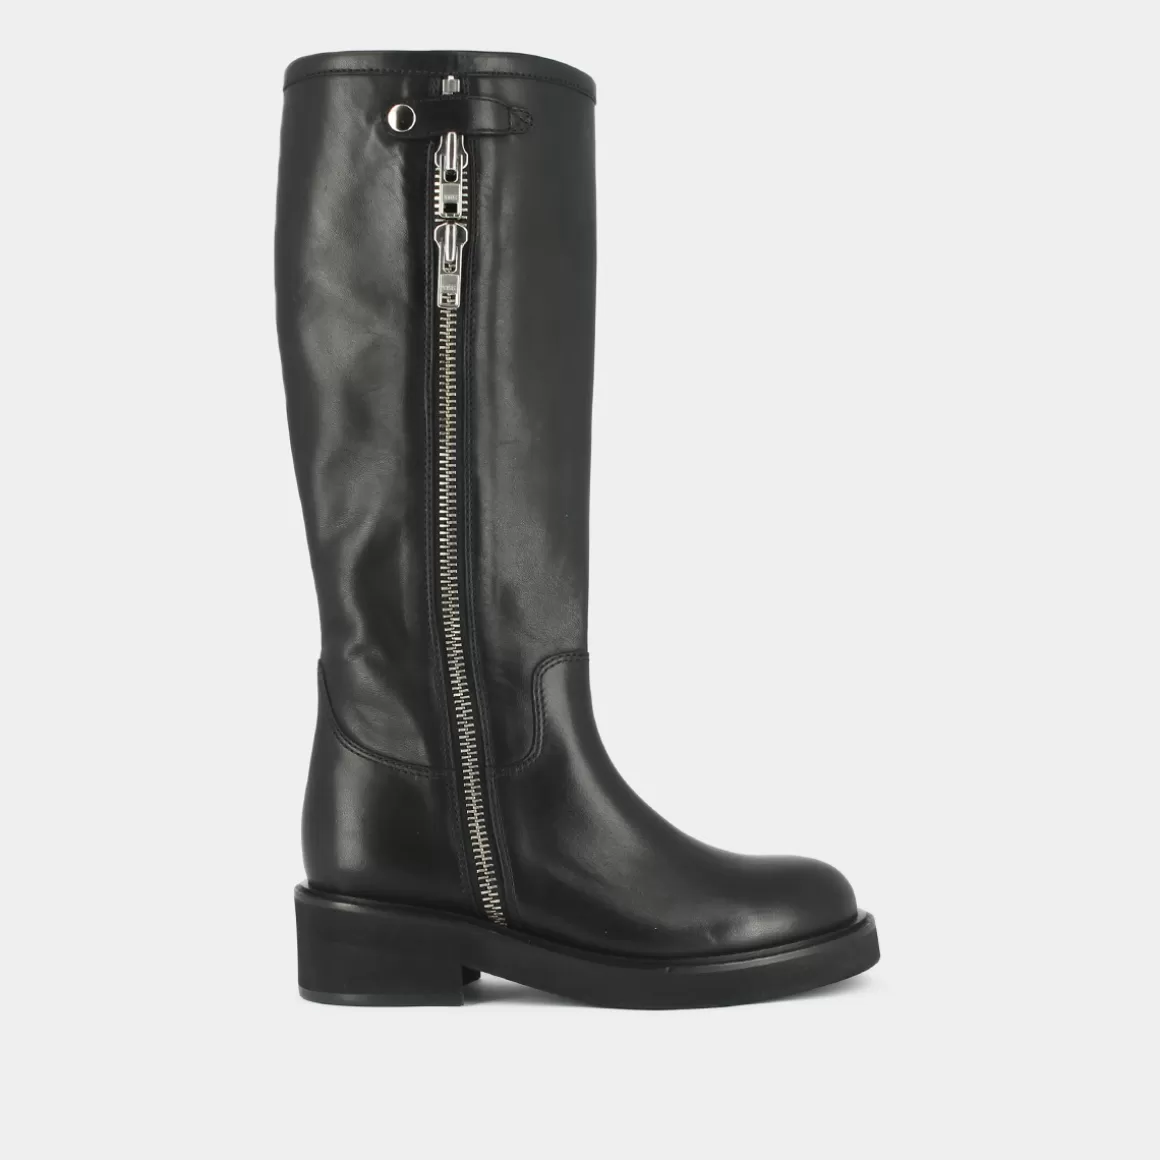 Boots with double zips<Jonak Cheap